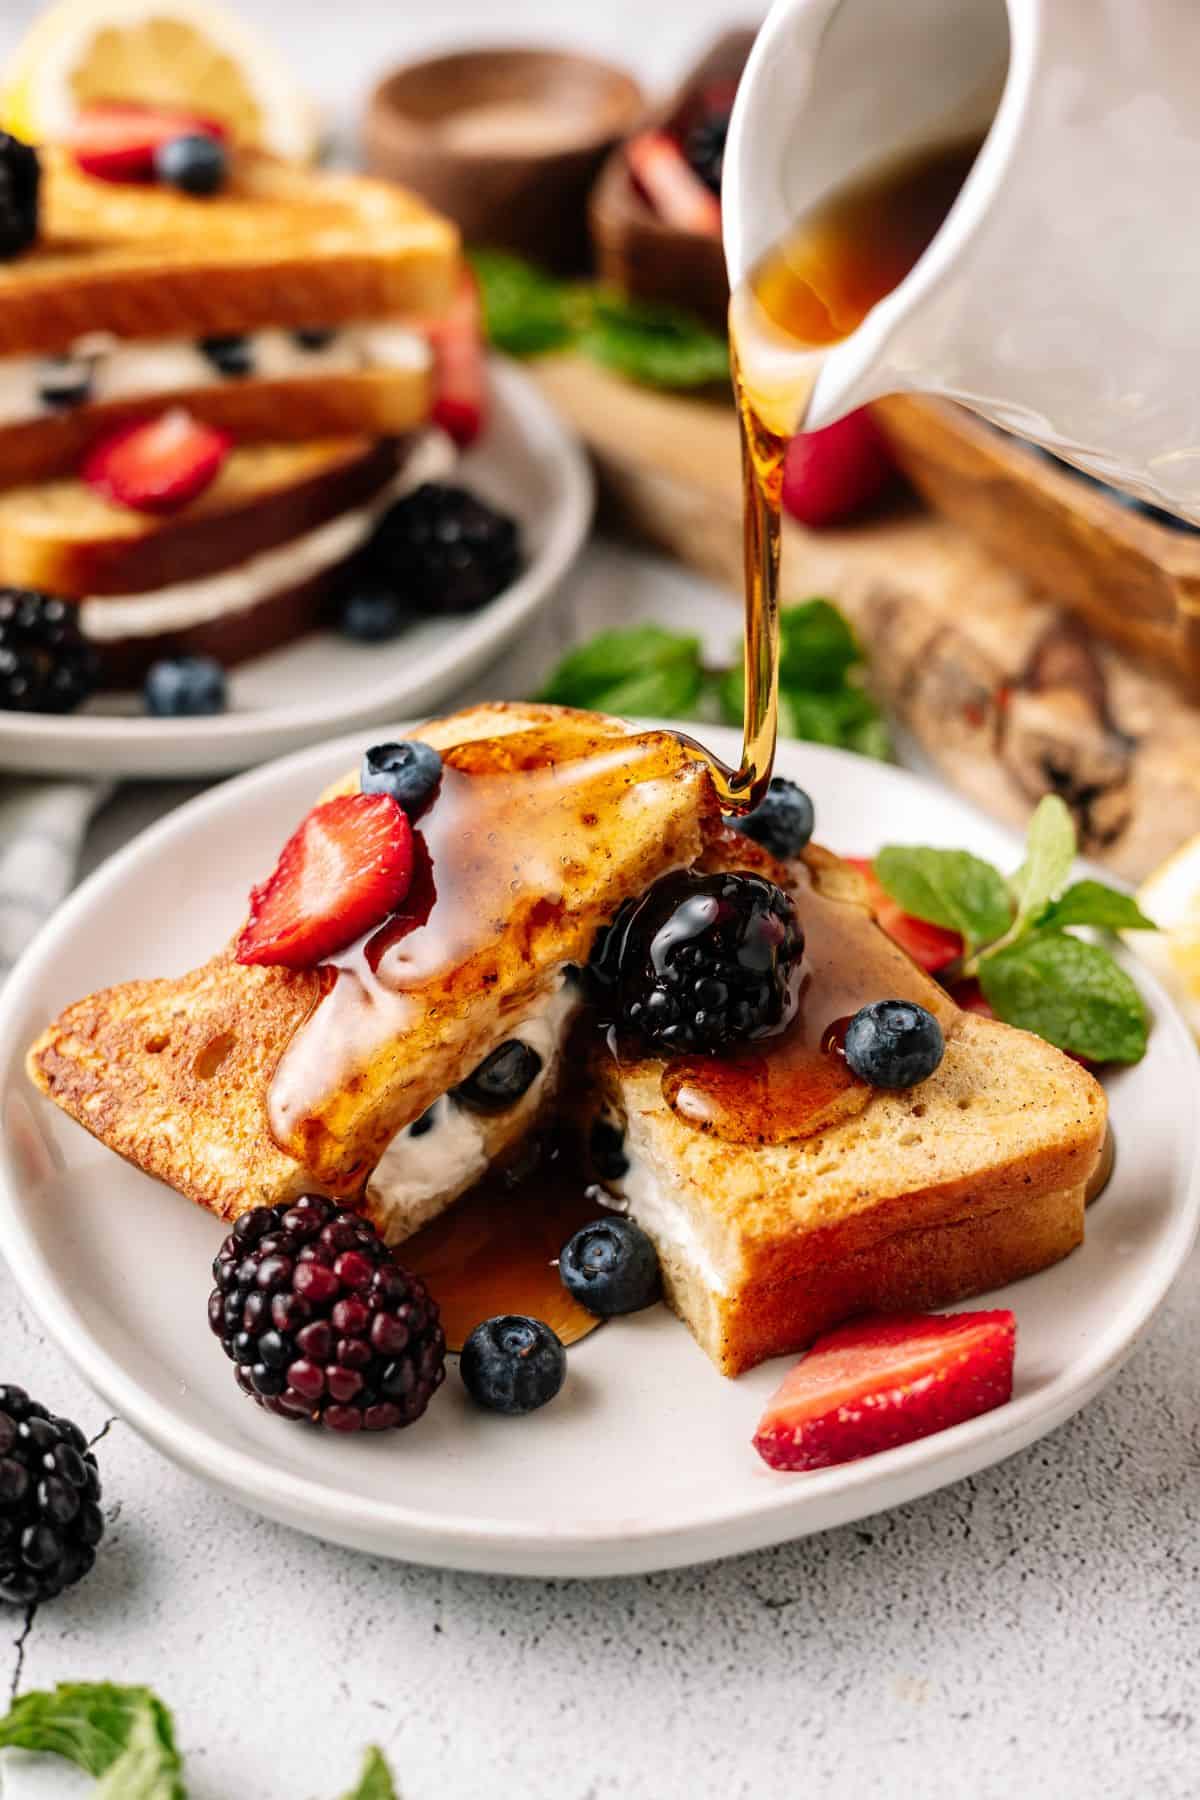 Keto French Toast stuffed with cream cheese and topped with blueberries, strawberries and maple syrup